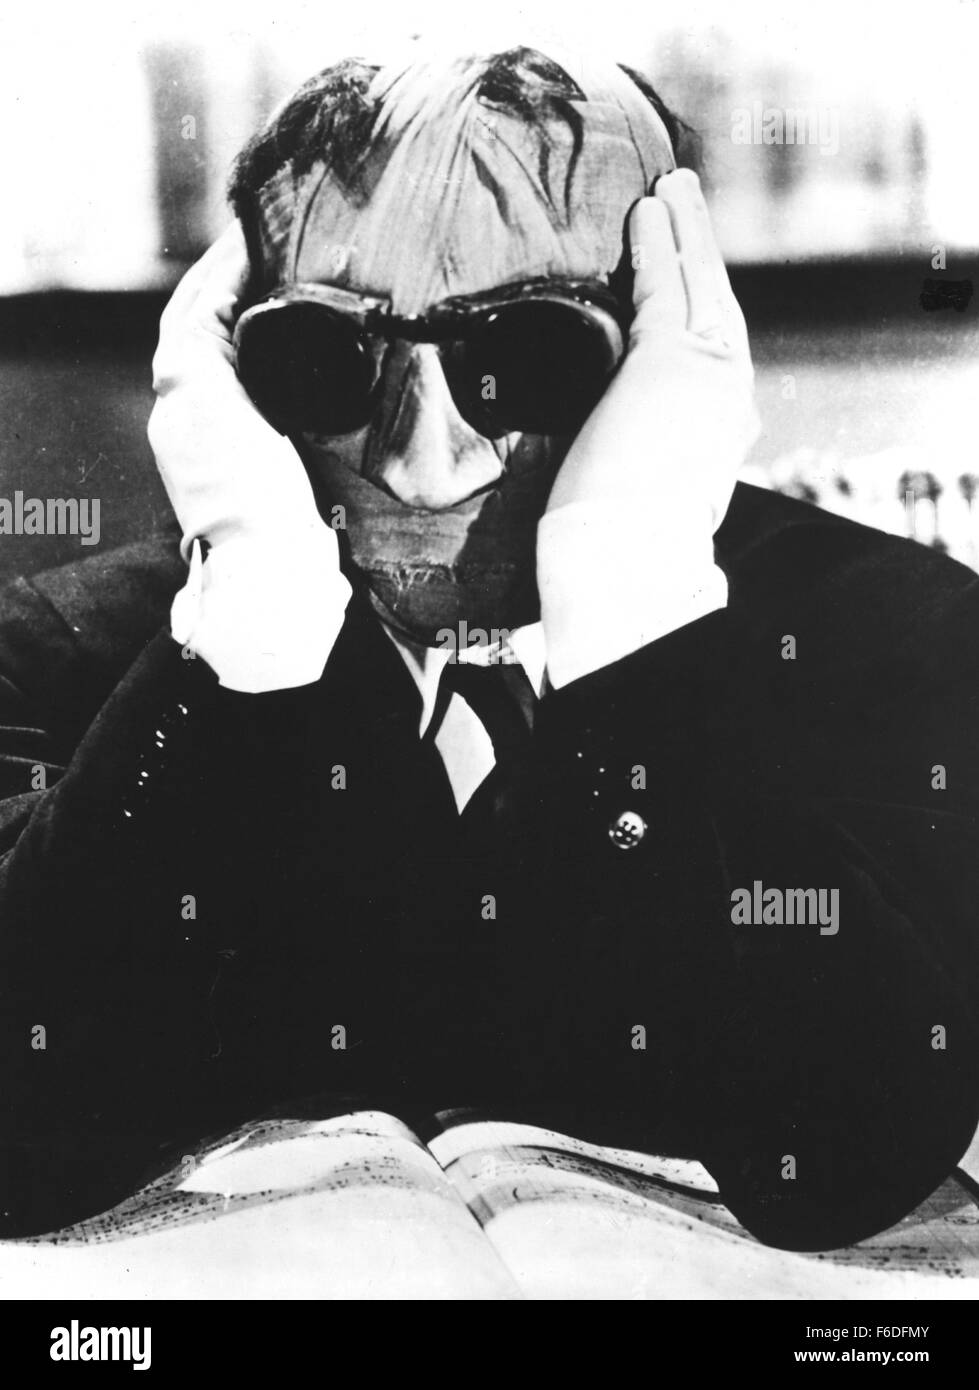 RELEASE DATE: November 13, 1933. MOVIE TITLE: The Invisible Man. STUDIO: Universal Pictures. PLOT: A mysterious man, whose head is completely covered in bandages, wants a room. The proprietors of the pub aren't used to making their house an inn during the winter months, but the man insists. They soon come to regret their decision. The man quickly runs out of money, and he has a violent temper besides. Worse still, he seems to be some kind of chemist and has filled his room with messy chemicals, test tubes, beakers and the like. When they try to throw him out, they make a ghastly discovery. Mea Stock Photo